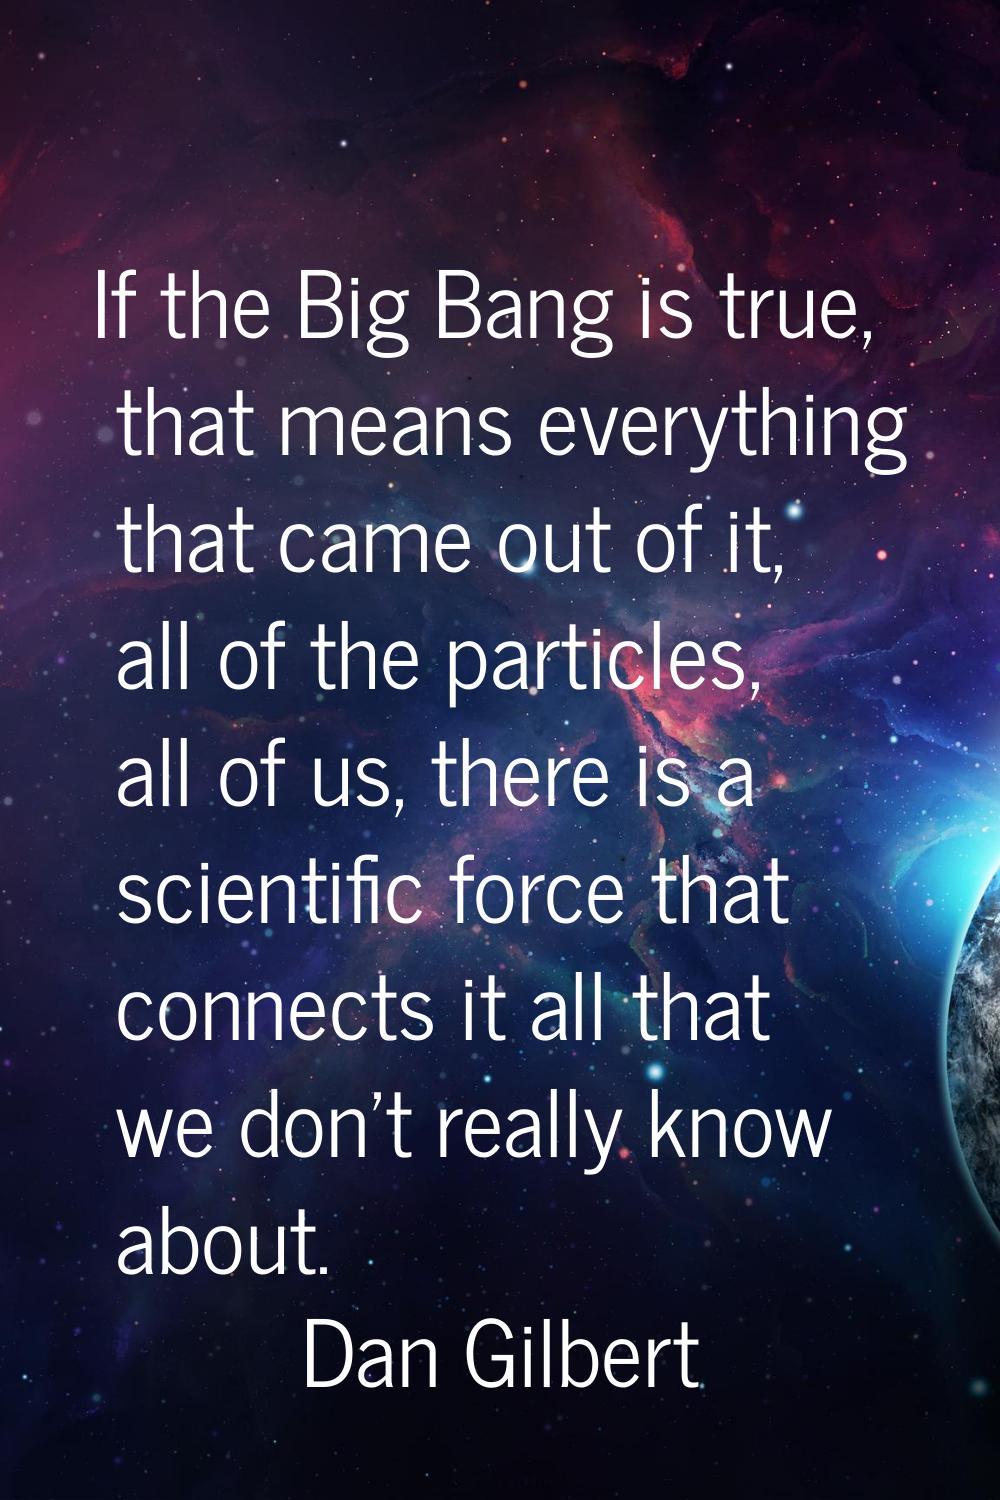 If the Big Bang is true, that means everything that came out of it, all of the particles, all of us